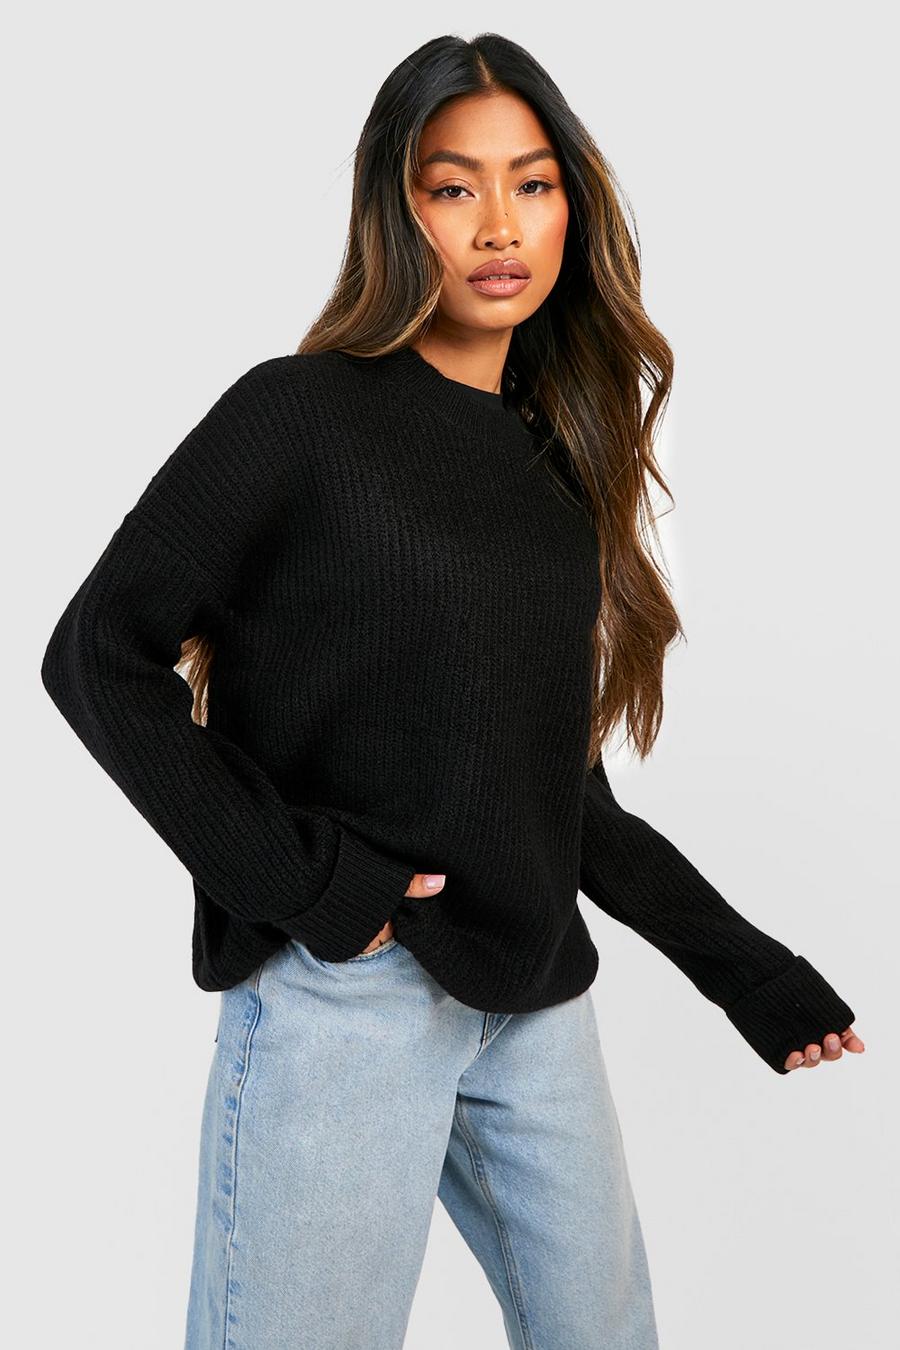 Black Turn Up Cuff Soft Knit Fisherman Knitted Sweater image number 1